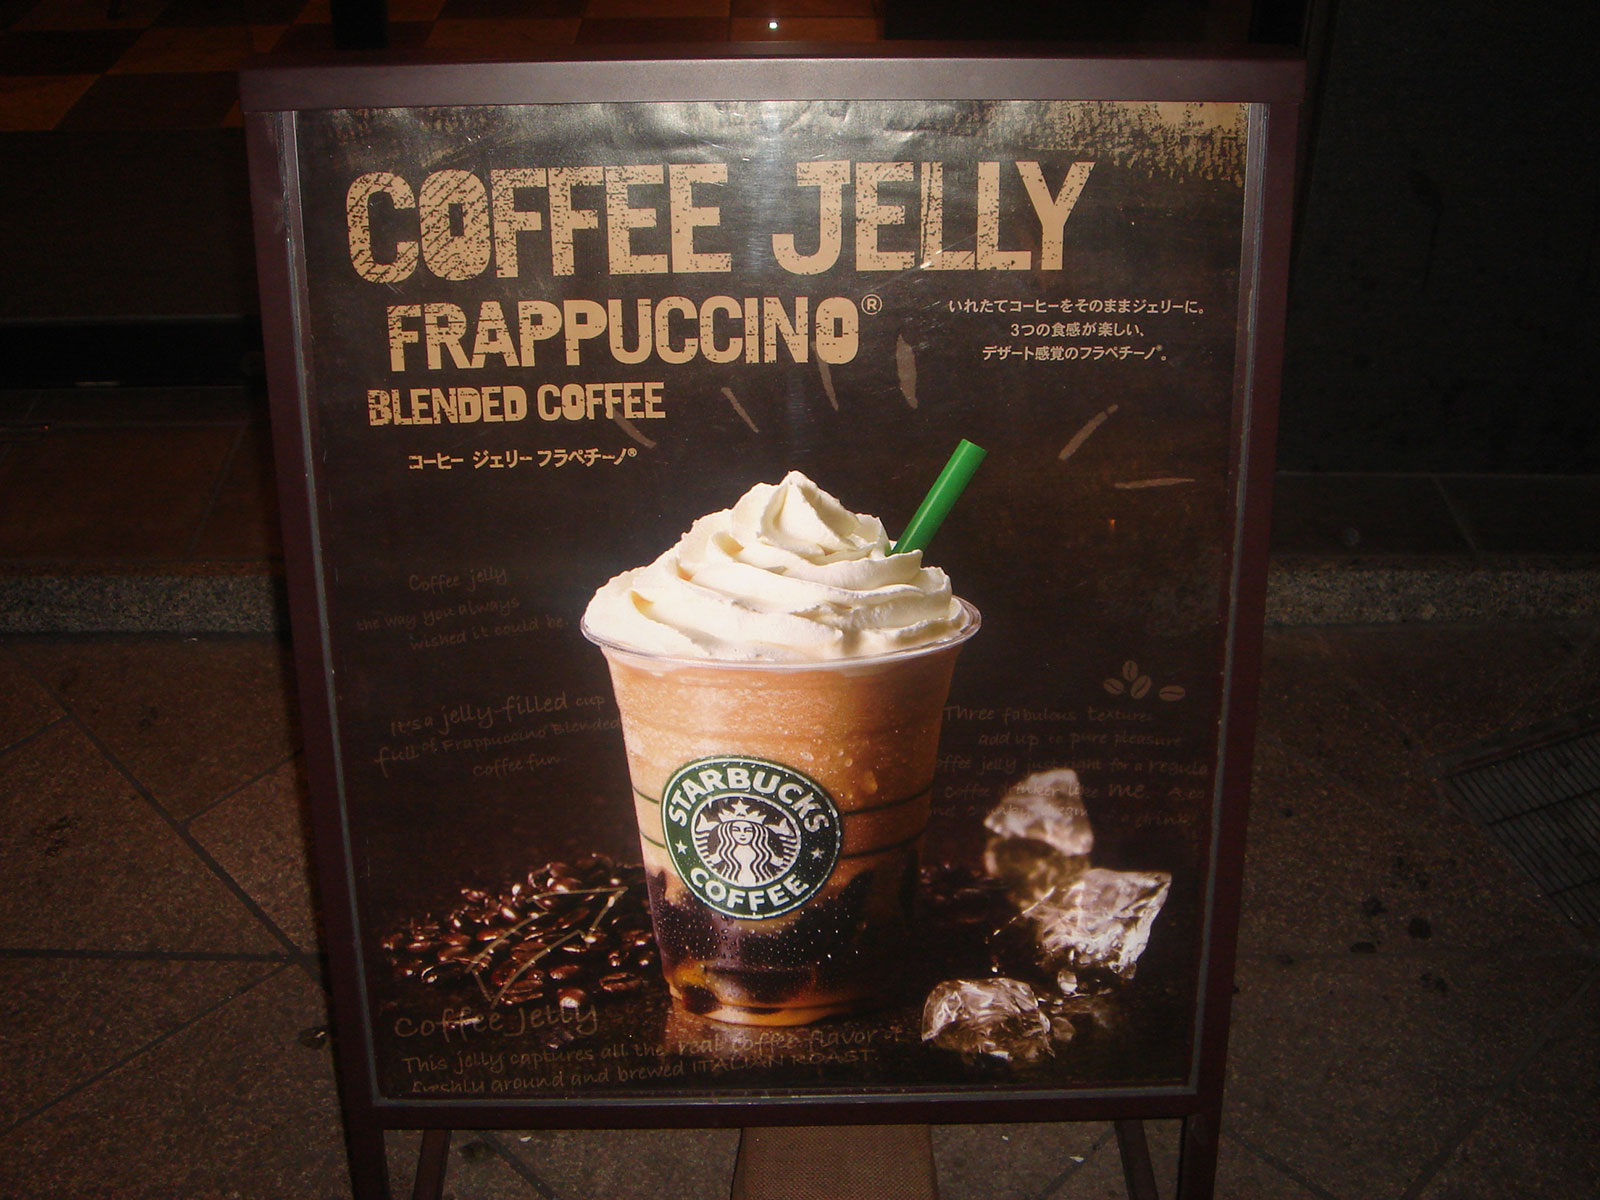 Coffee jelly frappuccino in the Pacific Asian region.